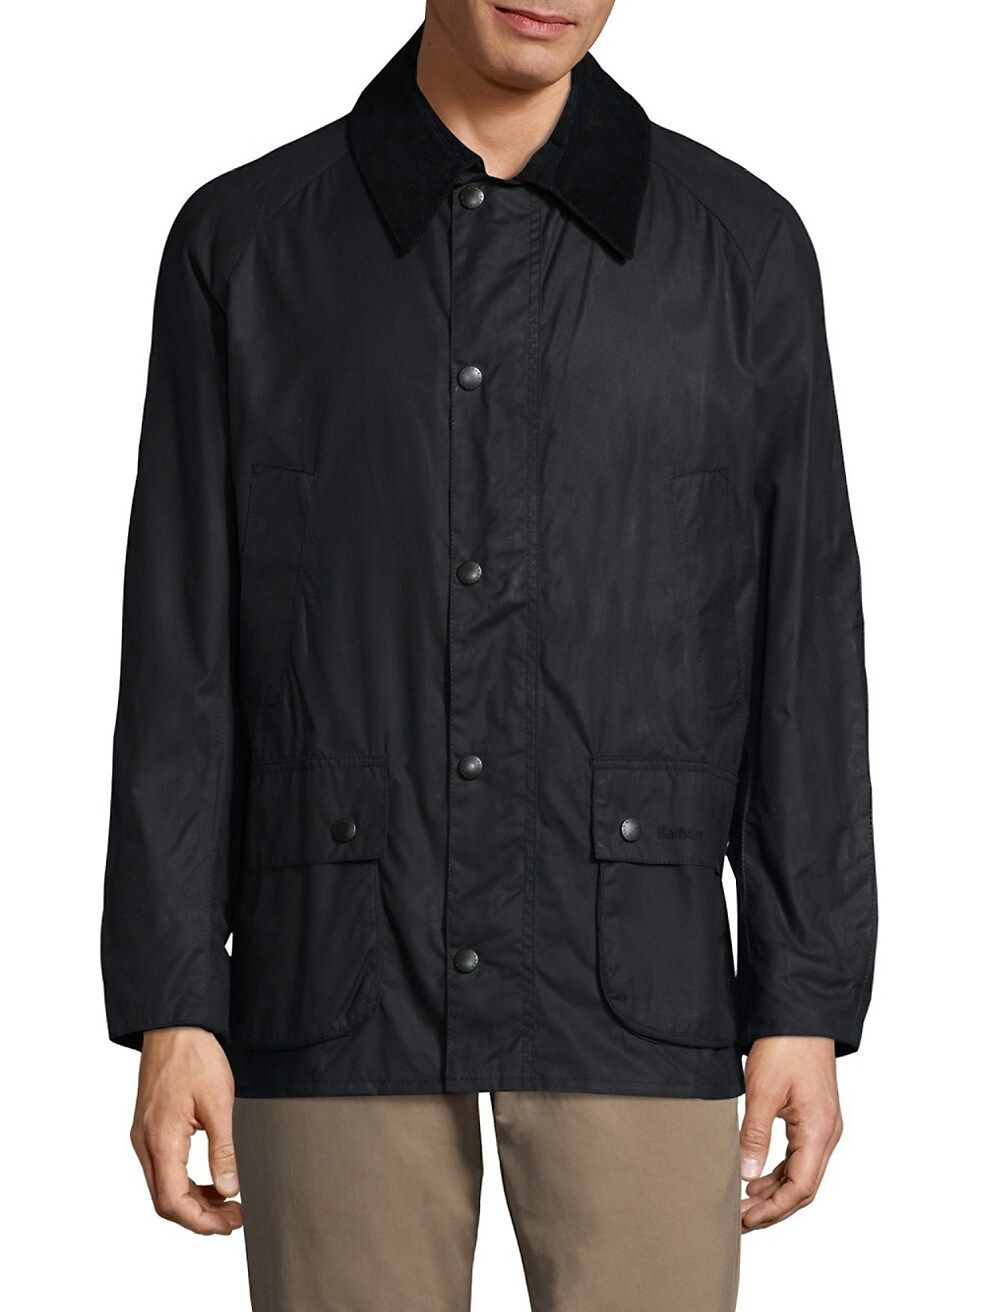 Barbour Barbour Ashby Wax Jacket | Saks Fifth Avenue